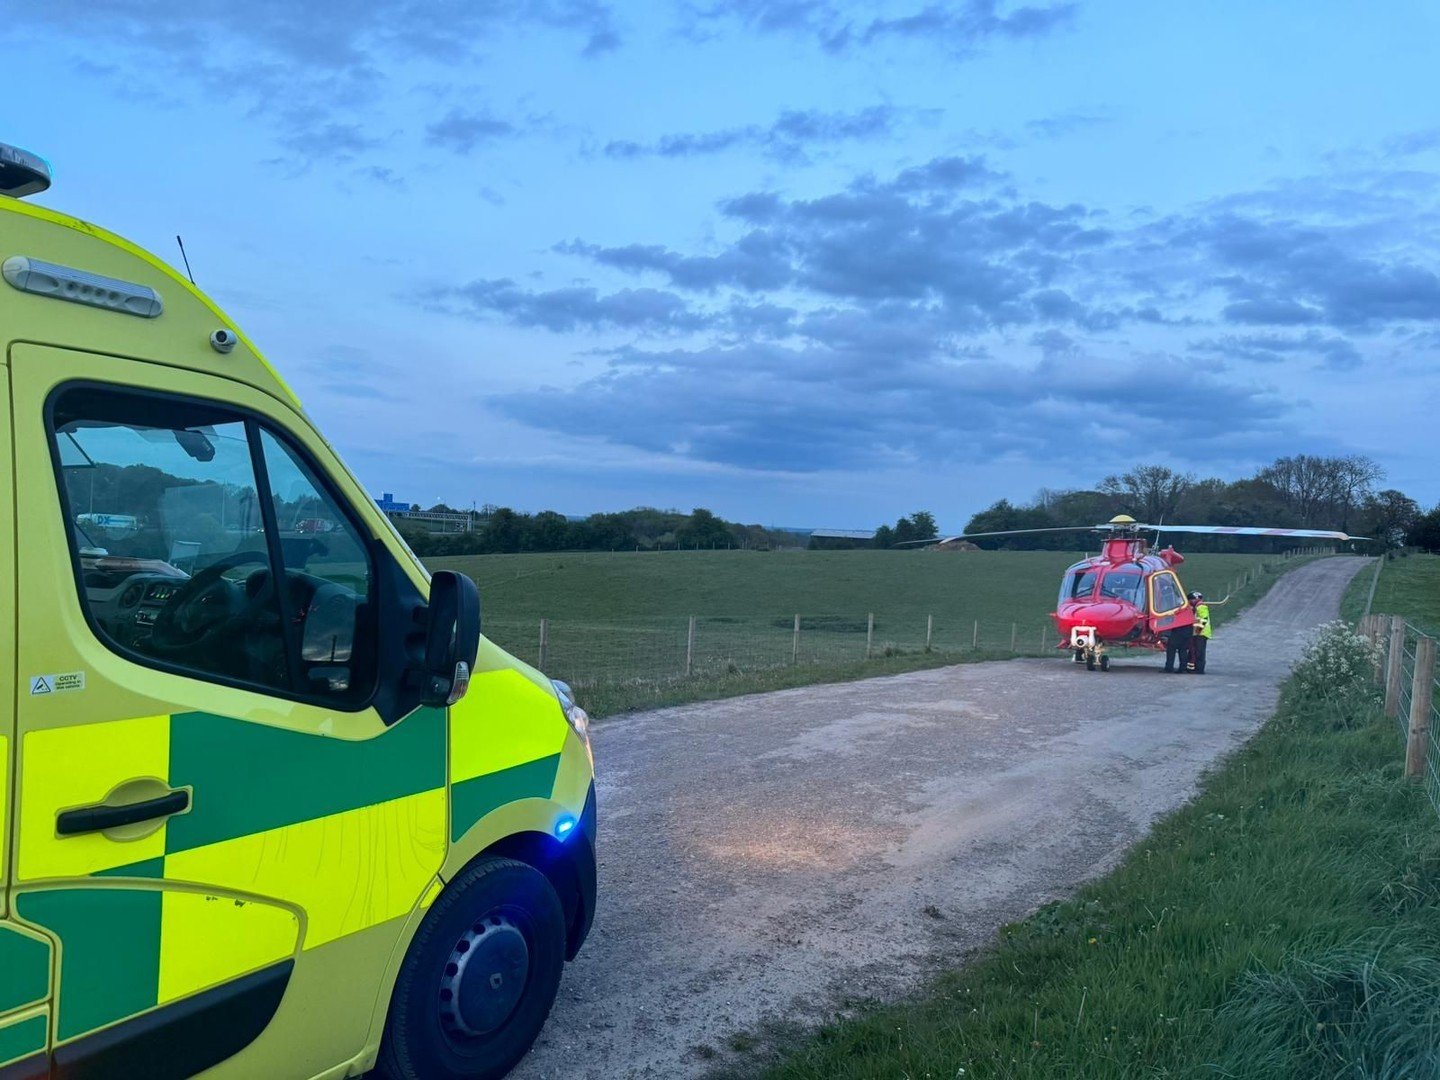 With special thanks to our friends over at @EHAAT_ For supporting some of #TeamMET recently at a challenging call. They were able to bring their advanced clinical knowledge to the scene and give the patient the best care alongside our emergency ambul